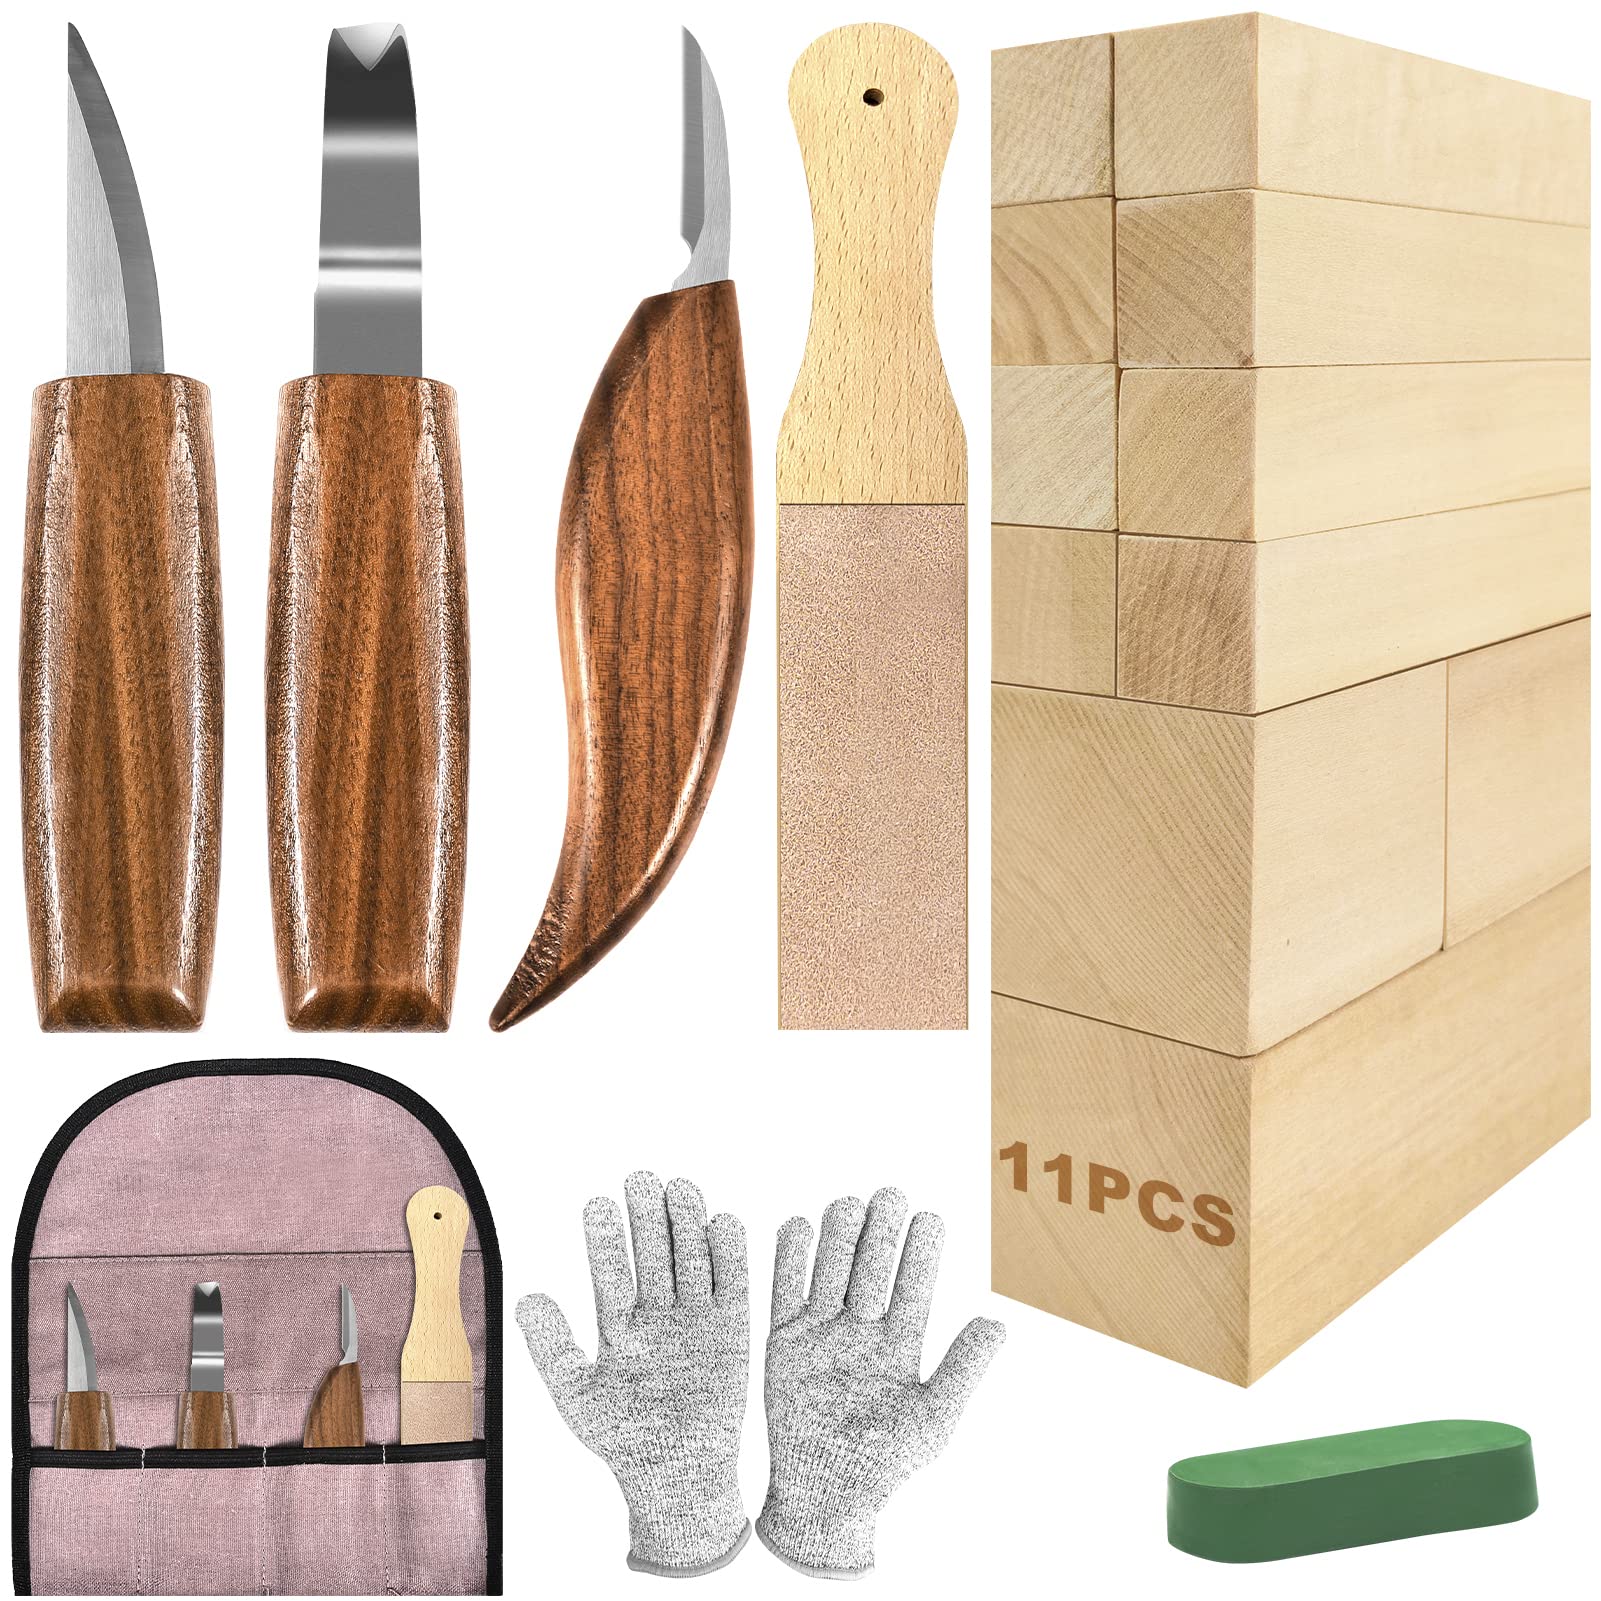 19 Pcs Wood Carving Tools Kit Knifies Set Spoon Carving Blanks Wood  Whittling Kit for Beginners